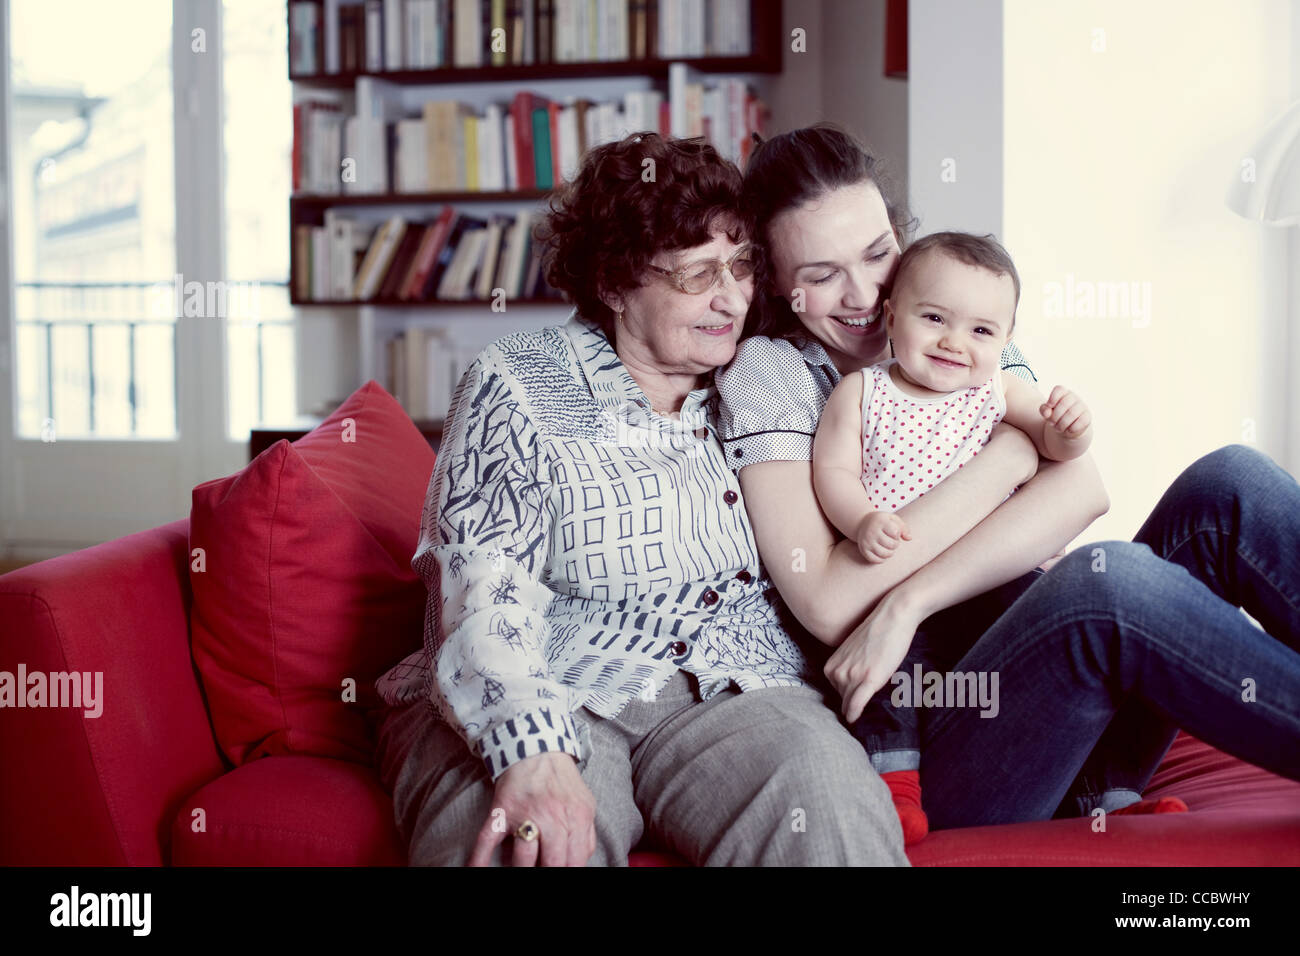 Grandmother, mother and baby girl, portrait Stock Photo